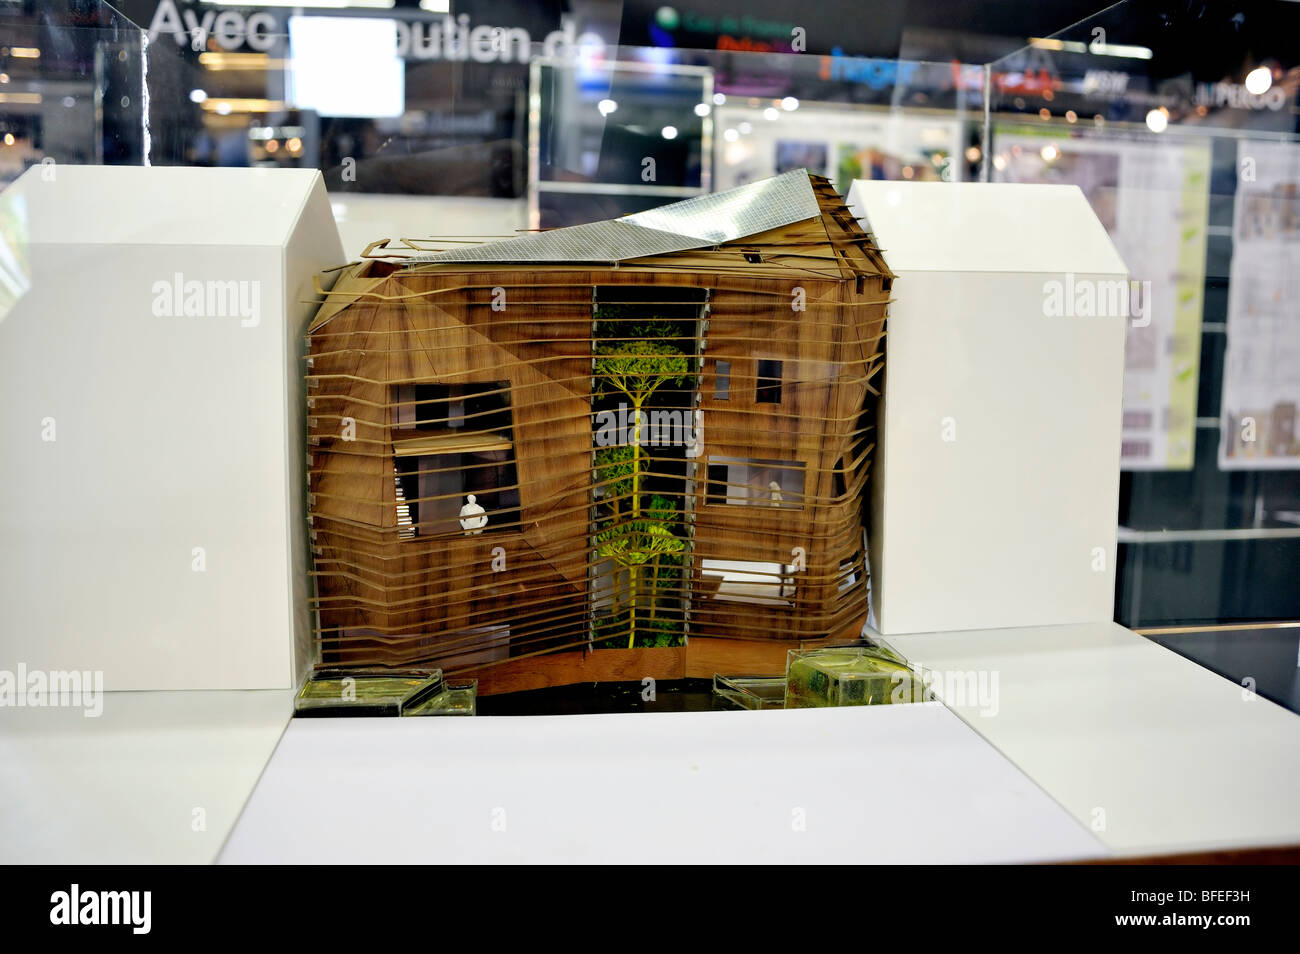 Paris, France, Construction Equipment Trade Show, Batimat, Eco-House 'Architectural Model', projects on display, house saving energy, ecological, Stock Photo